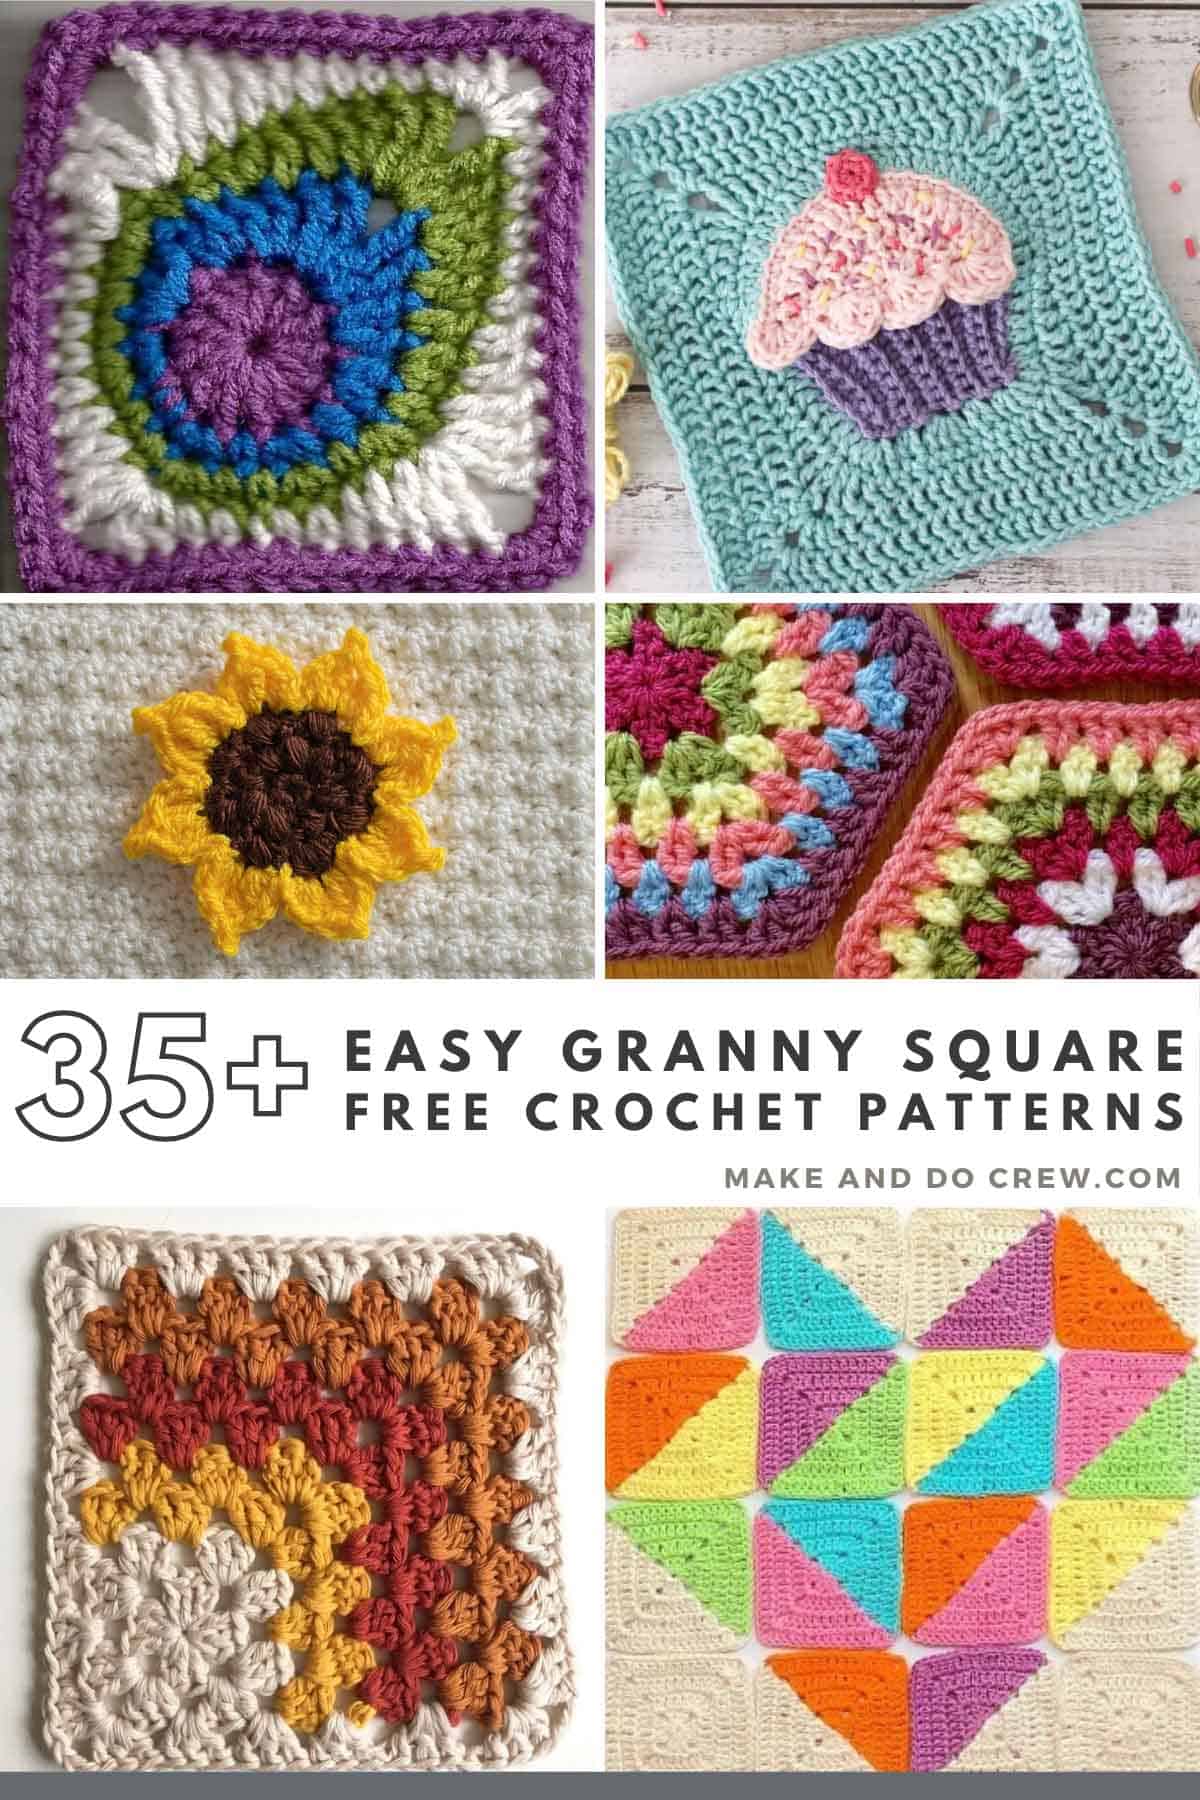 A 6-photo grid showing examples of the 35+ easy granny square free crochet patterns.
